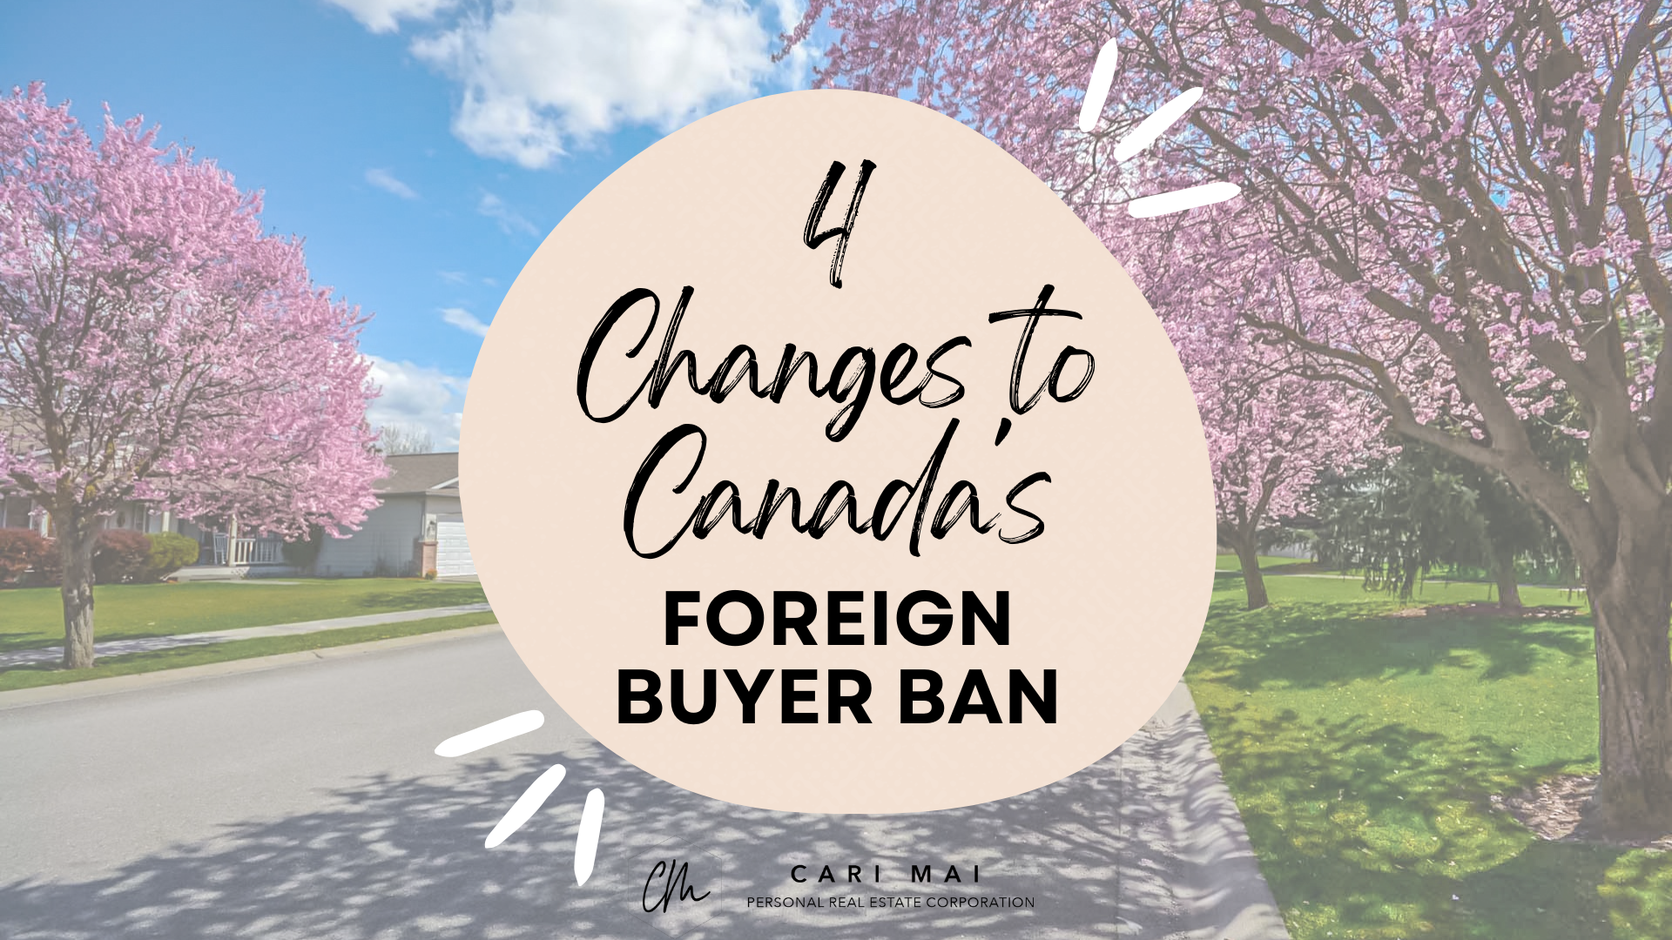 4 Changes to Canada's Foreign Buyer Ban by vancouver realtor cari mai